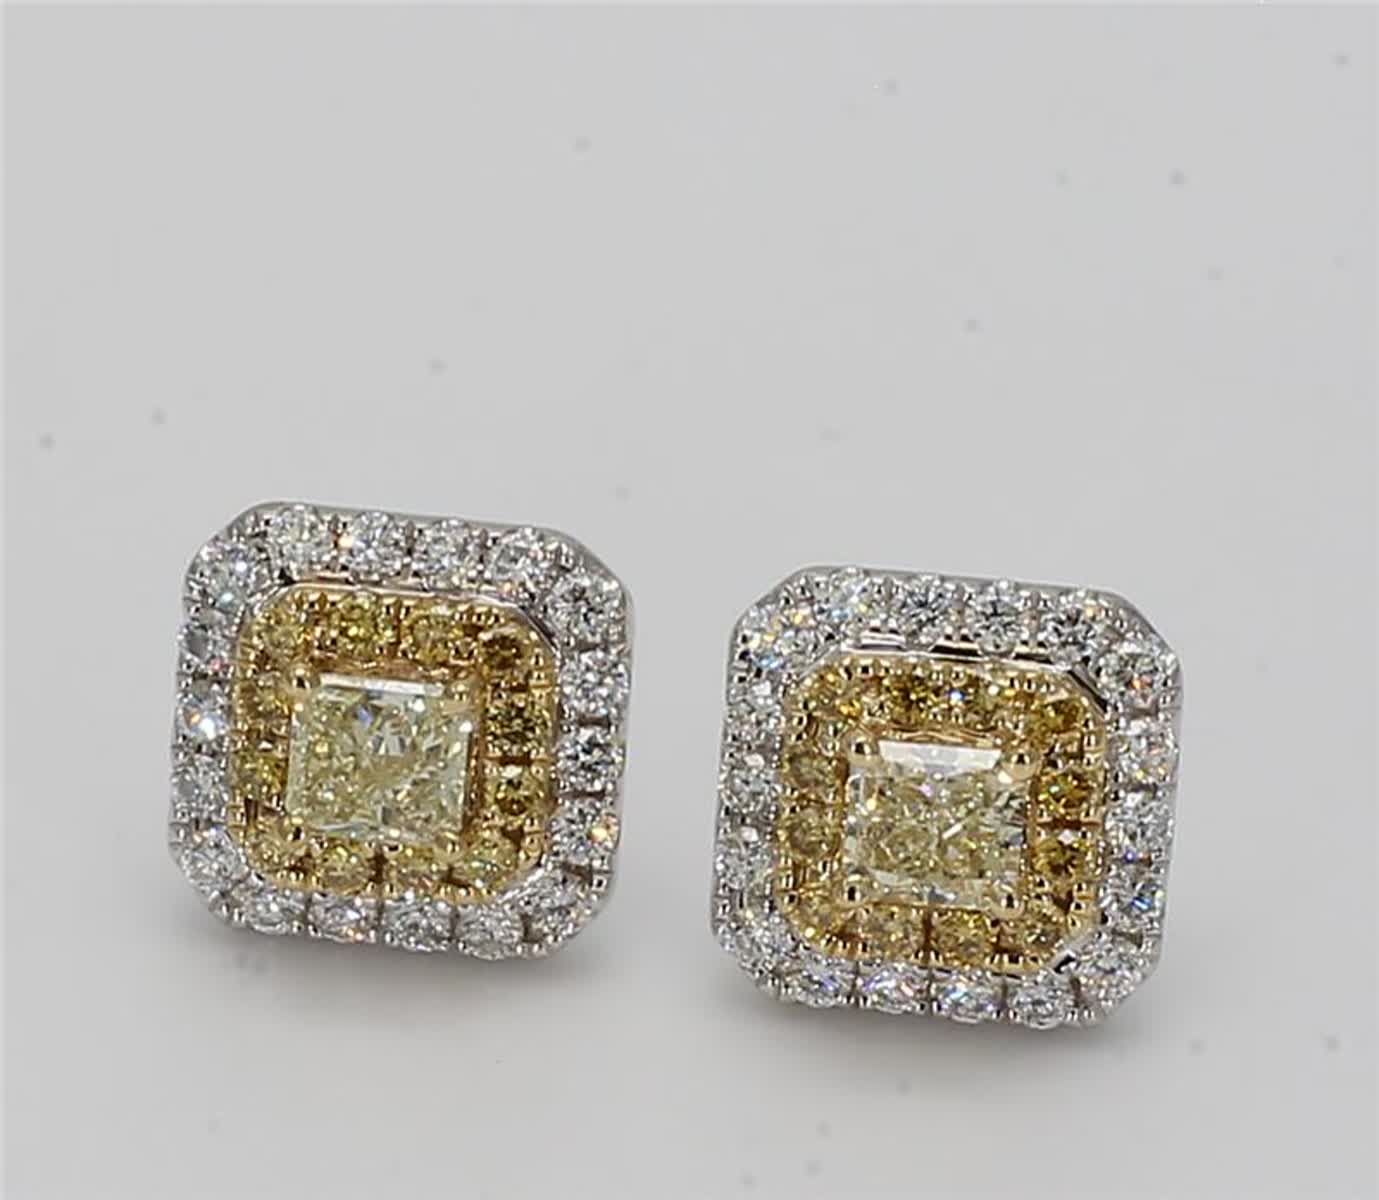 Natural Yellow Cushion and White Diamond 1.24 Carat TW Gold Stud Earrings